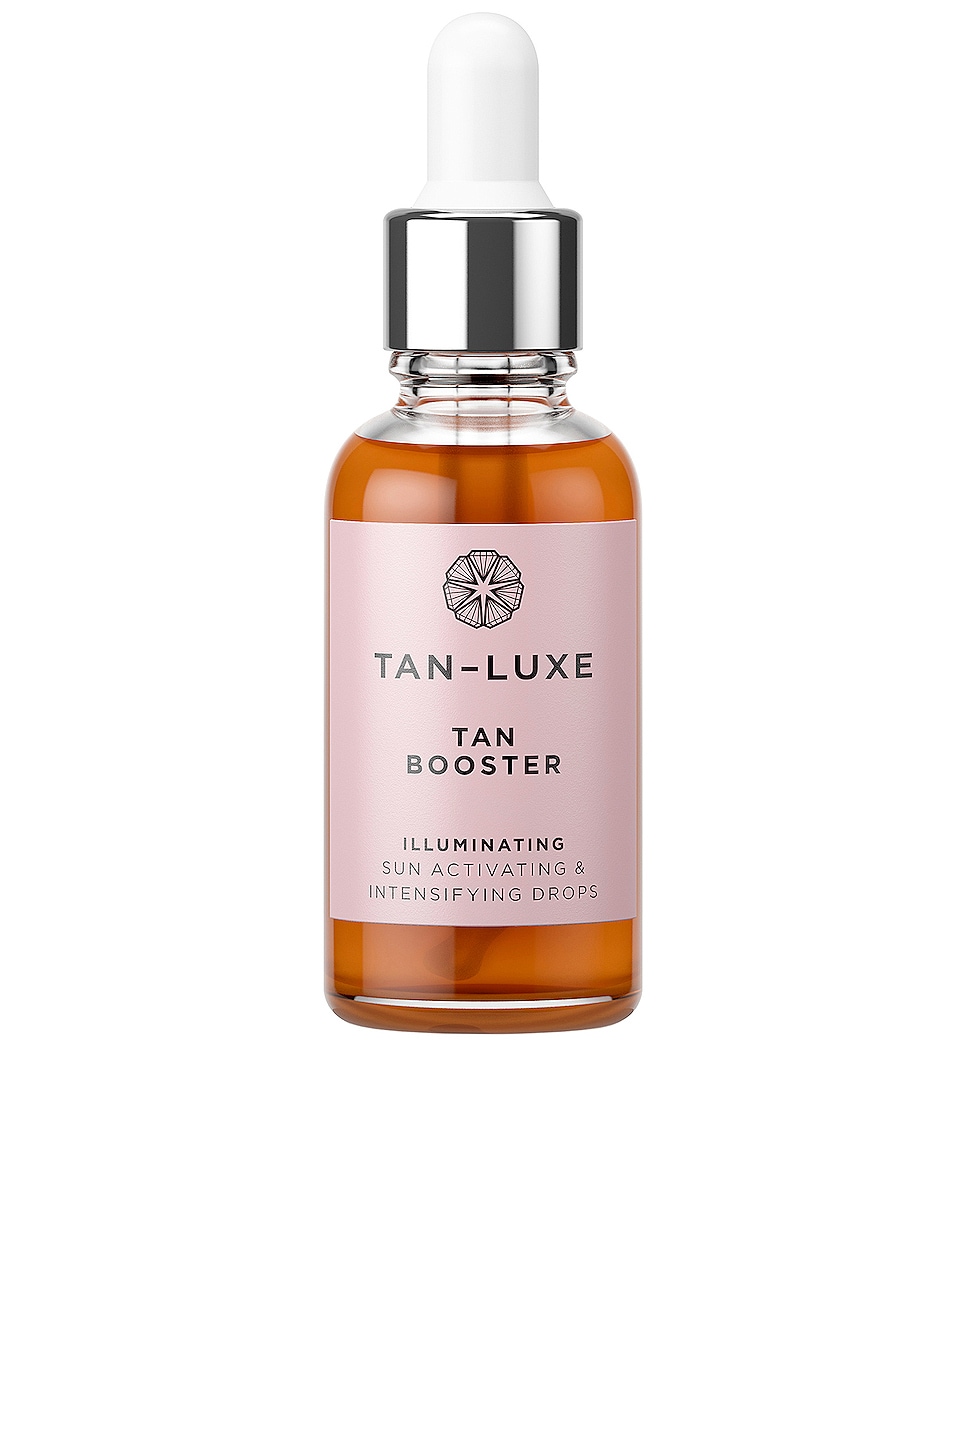 TAN-LUXE TAN LUXE TAN BOOSTER ILLUMINATING SUN ACTIVATING & INTENSIFYING DROPS IN BEAUTY: NA.,TUXR-WU10